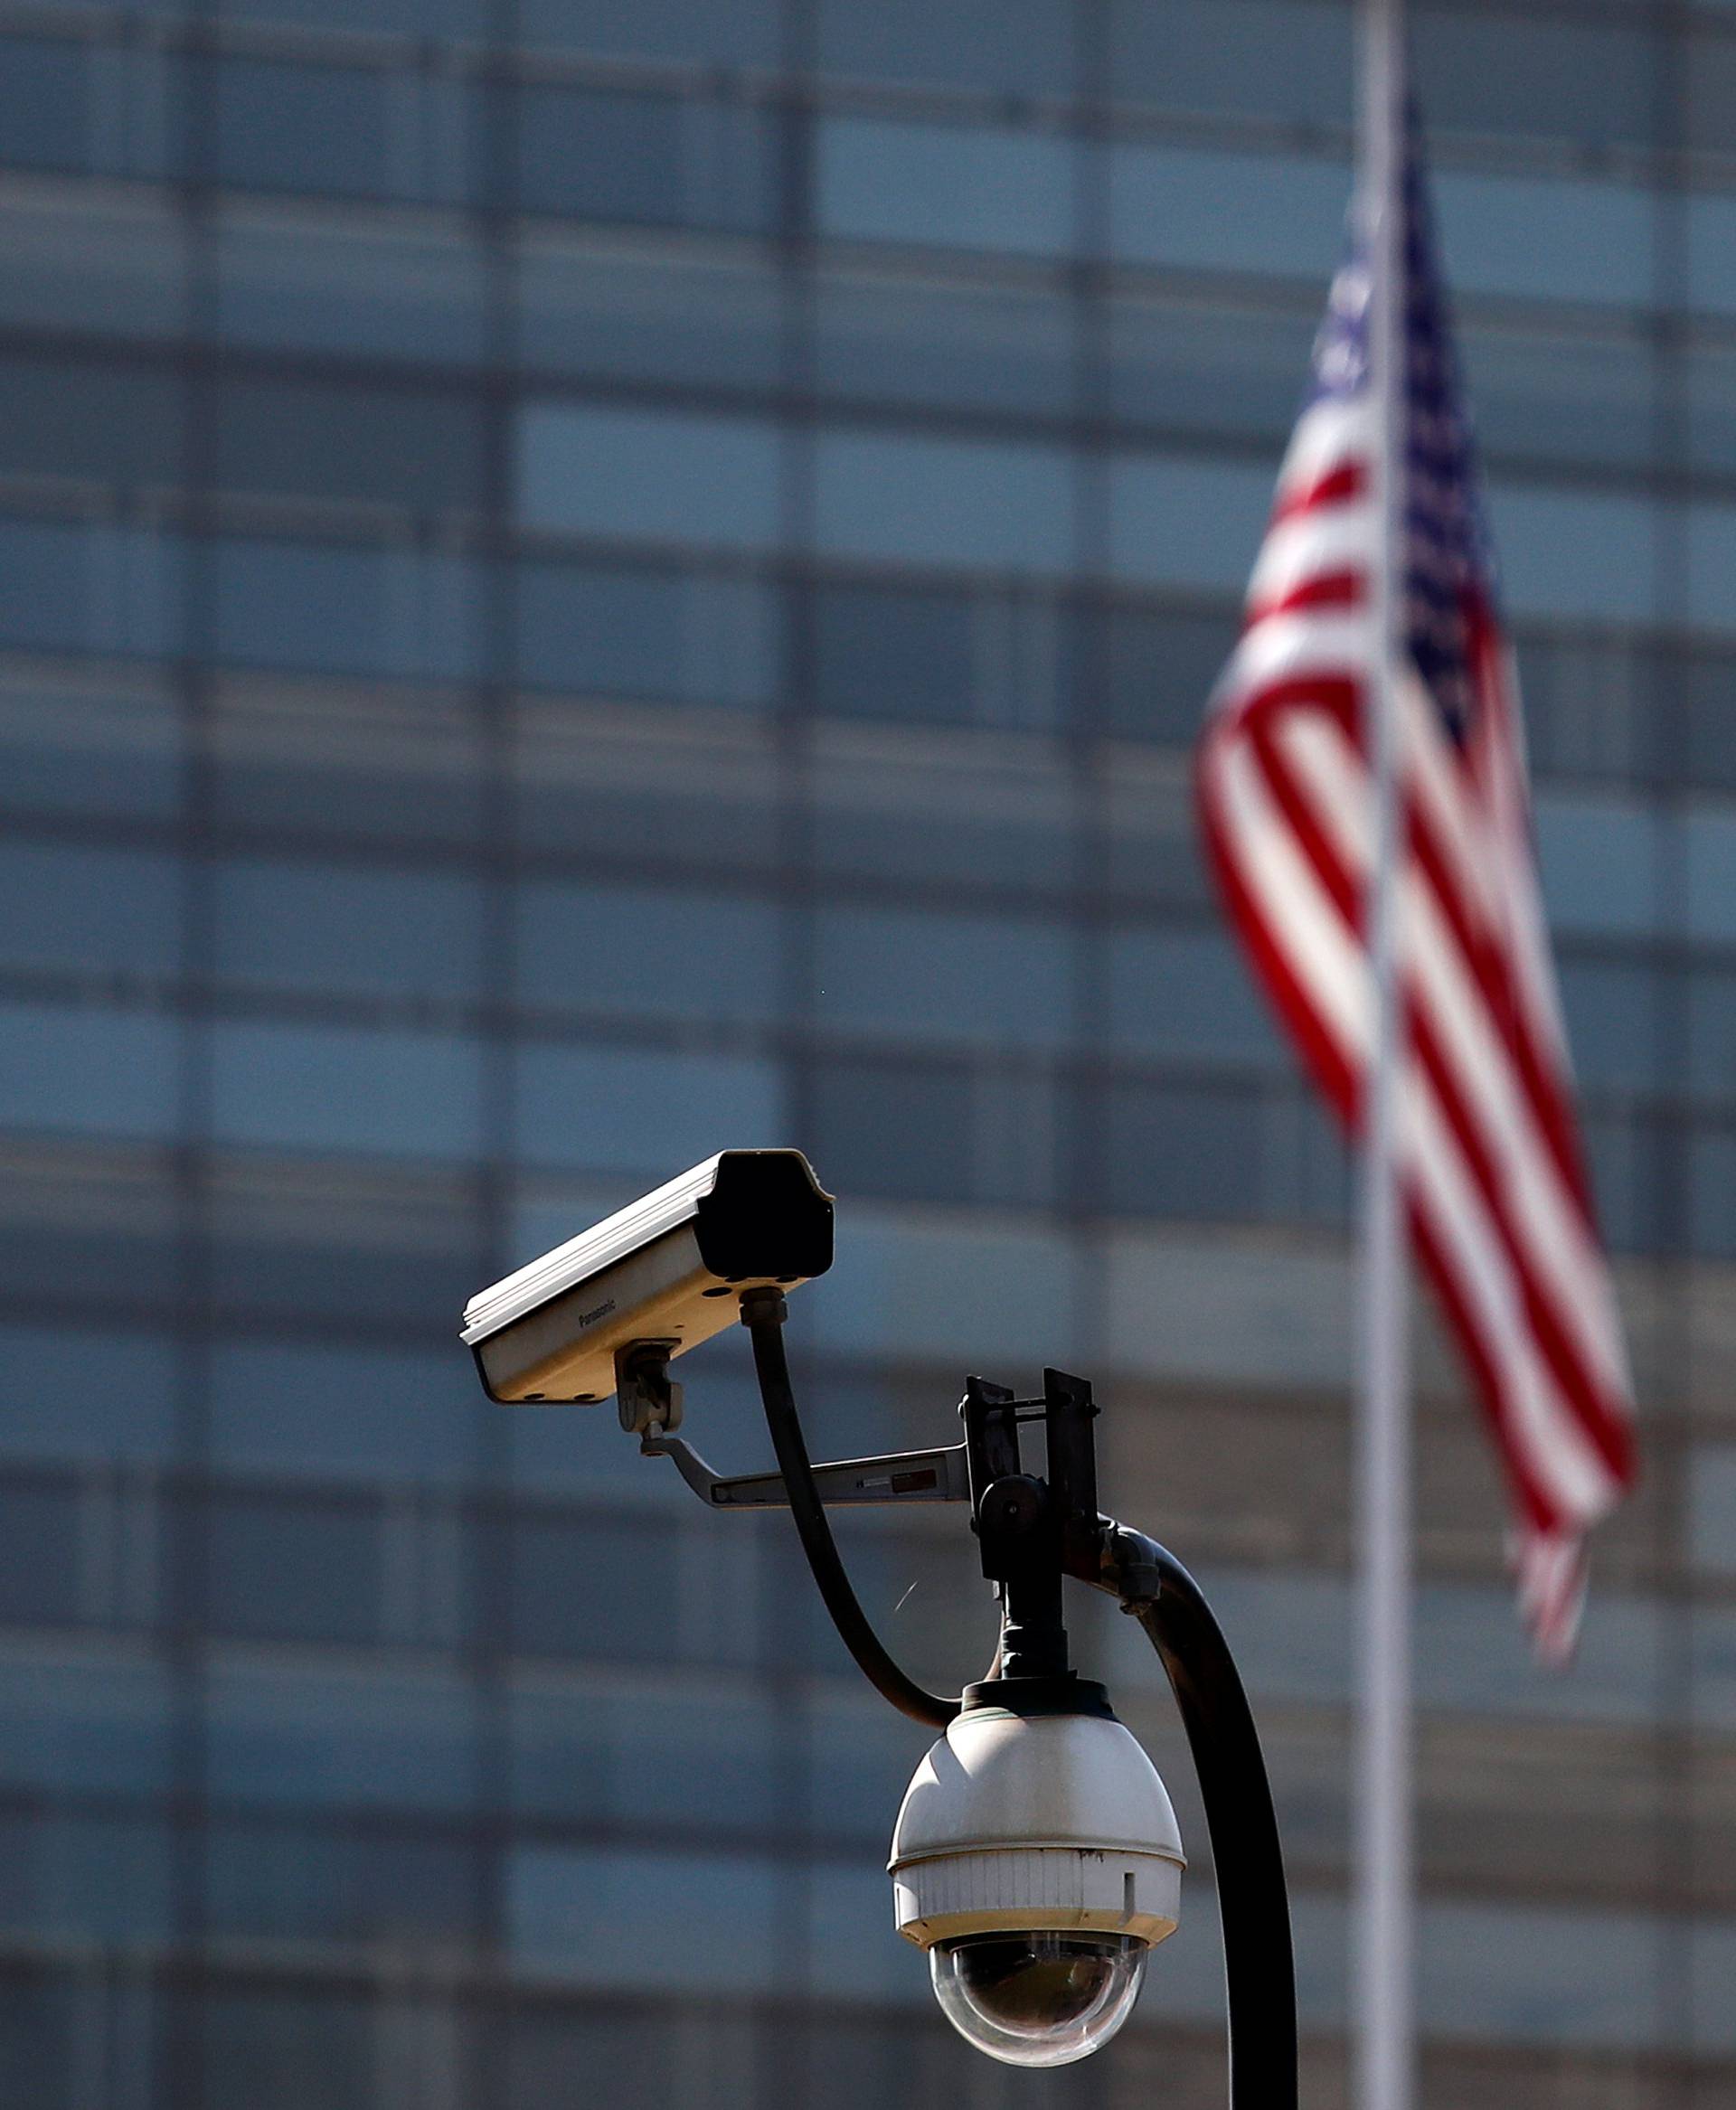 Security cameras are seen at the U.S. embassy in Beijing